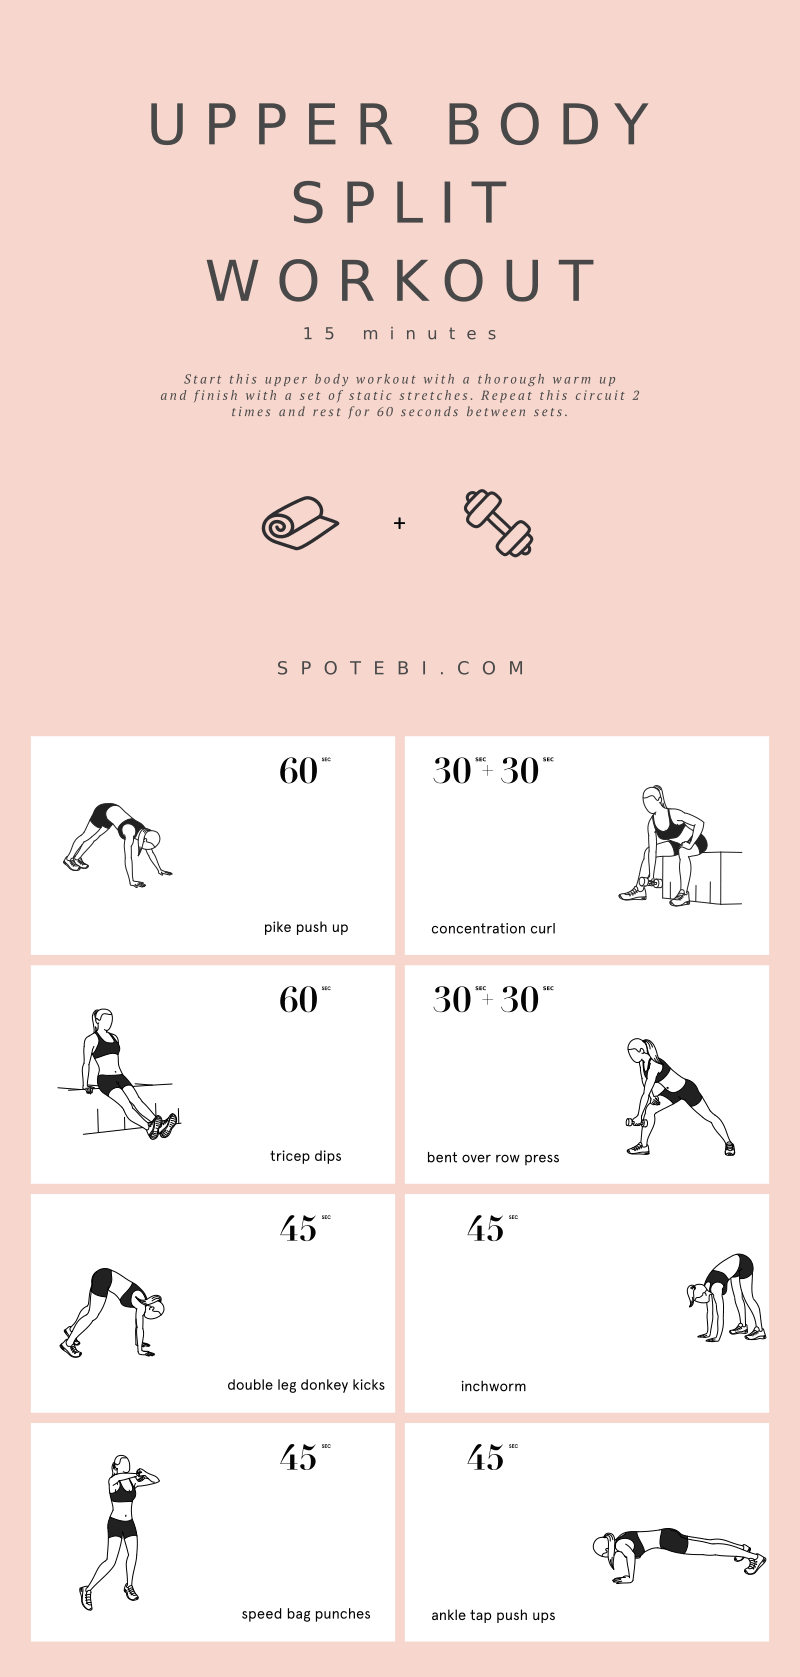 Who's ready to burn major calories while toning your whole upper body?! This quick 15-minute Upper Body Split Workout targets your arms, shoulders, upper back, and chest and helps you burn tons of calories. https://www.spotebi.com/workout-routines/15-minute-upper-body-split-workout/